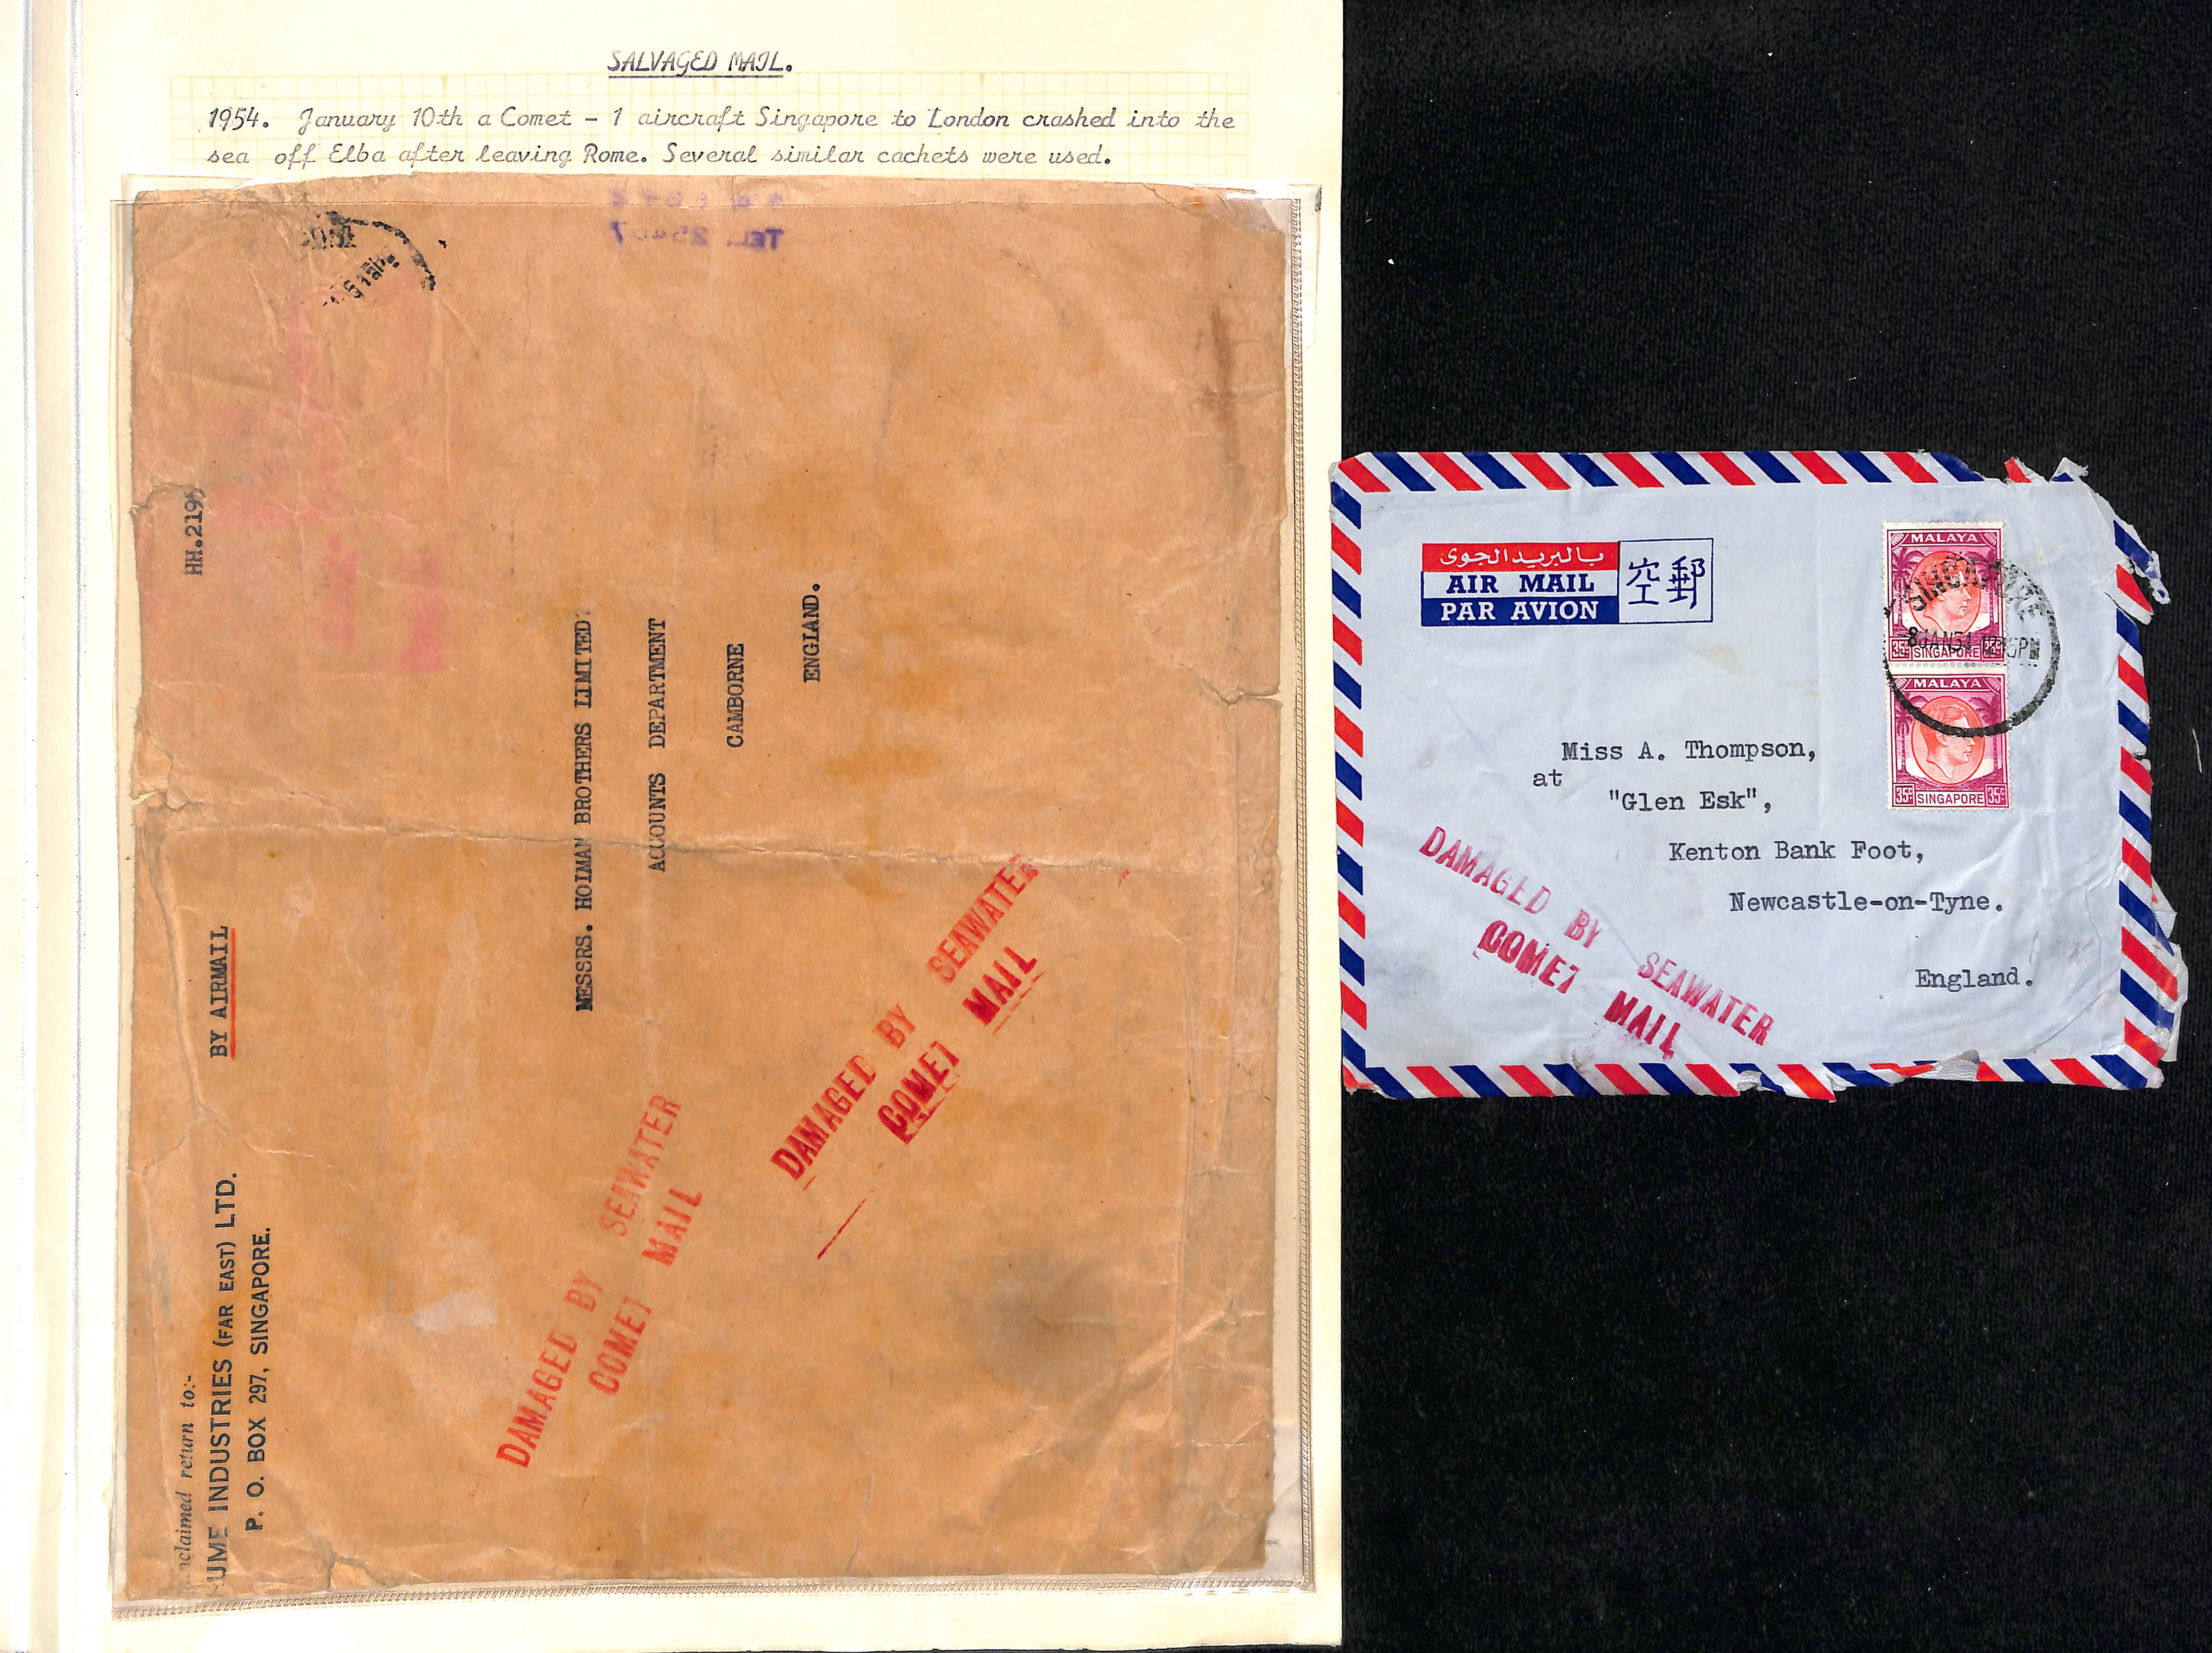 1954 (Jan. 8) Covers from Singapore to G.B., both with the "T" below "Y" cachet, one with part